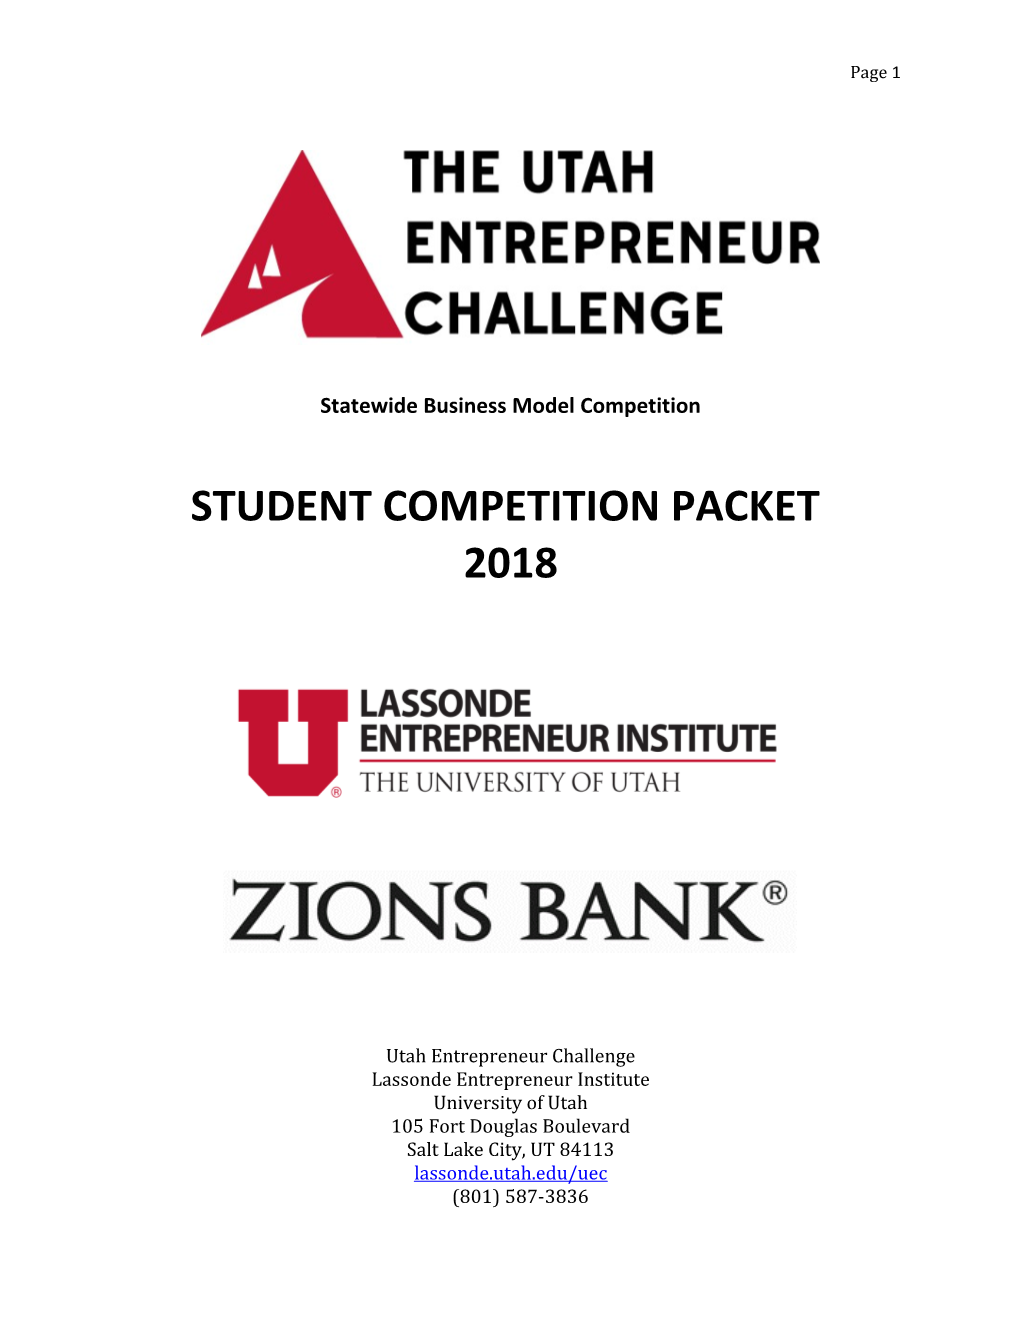 Statewide Business Model Competition